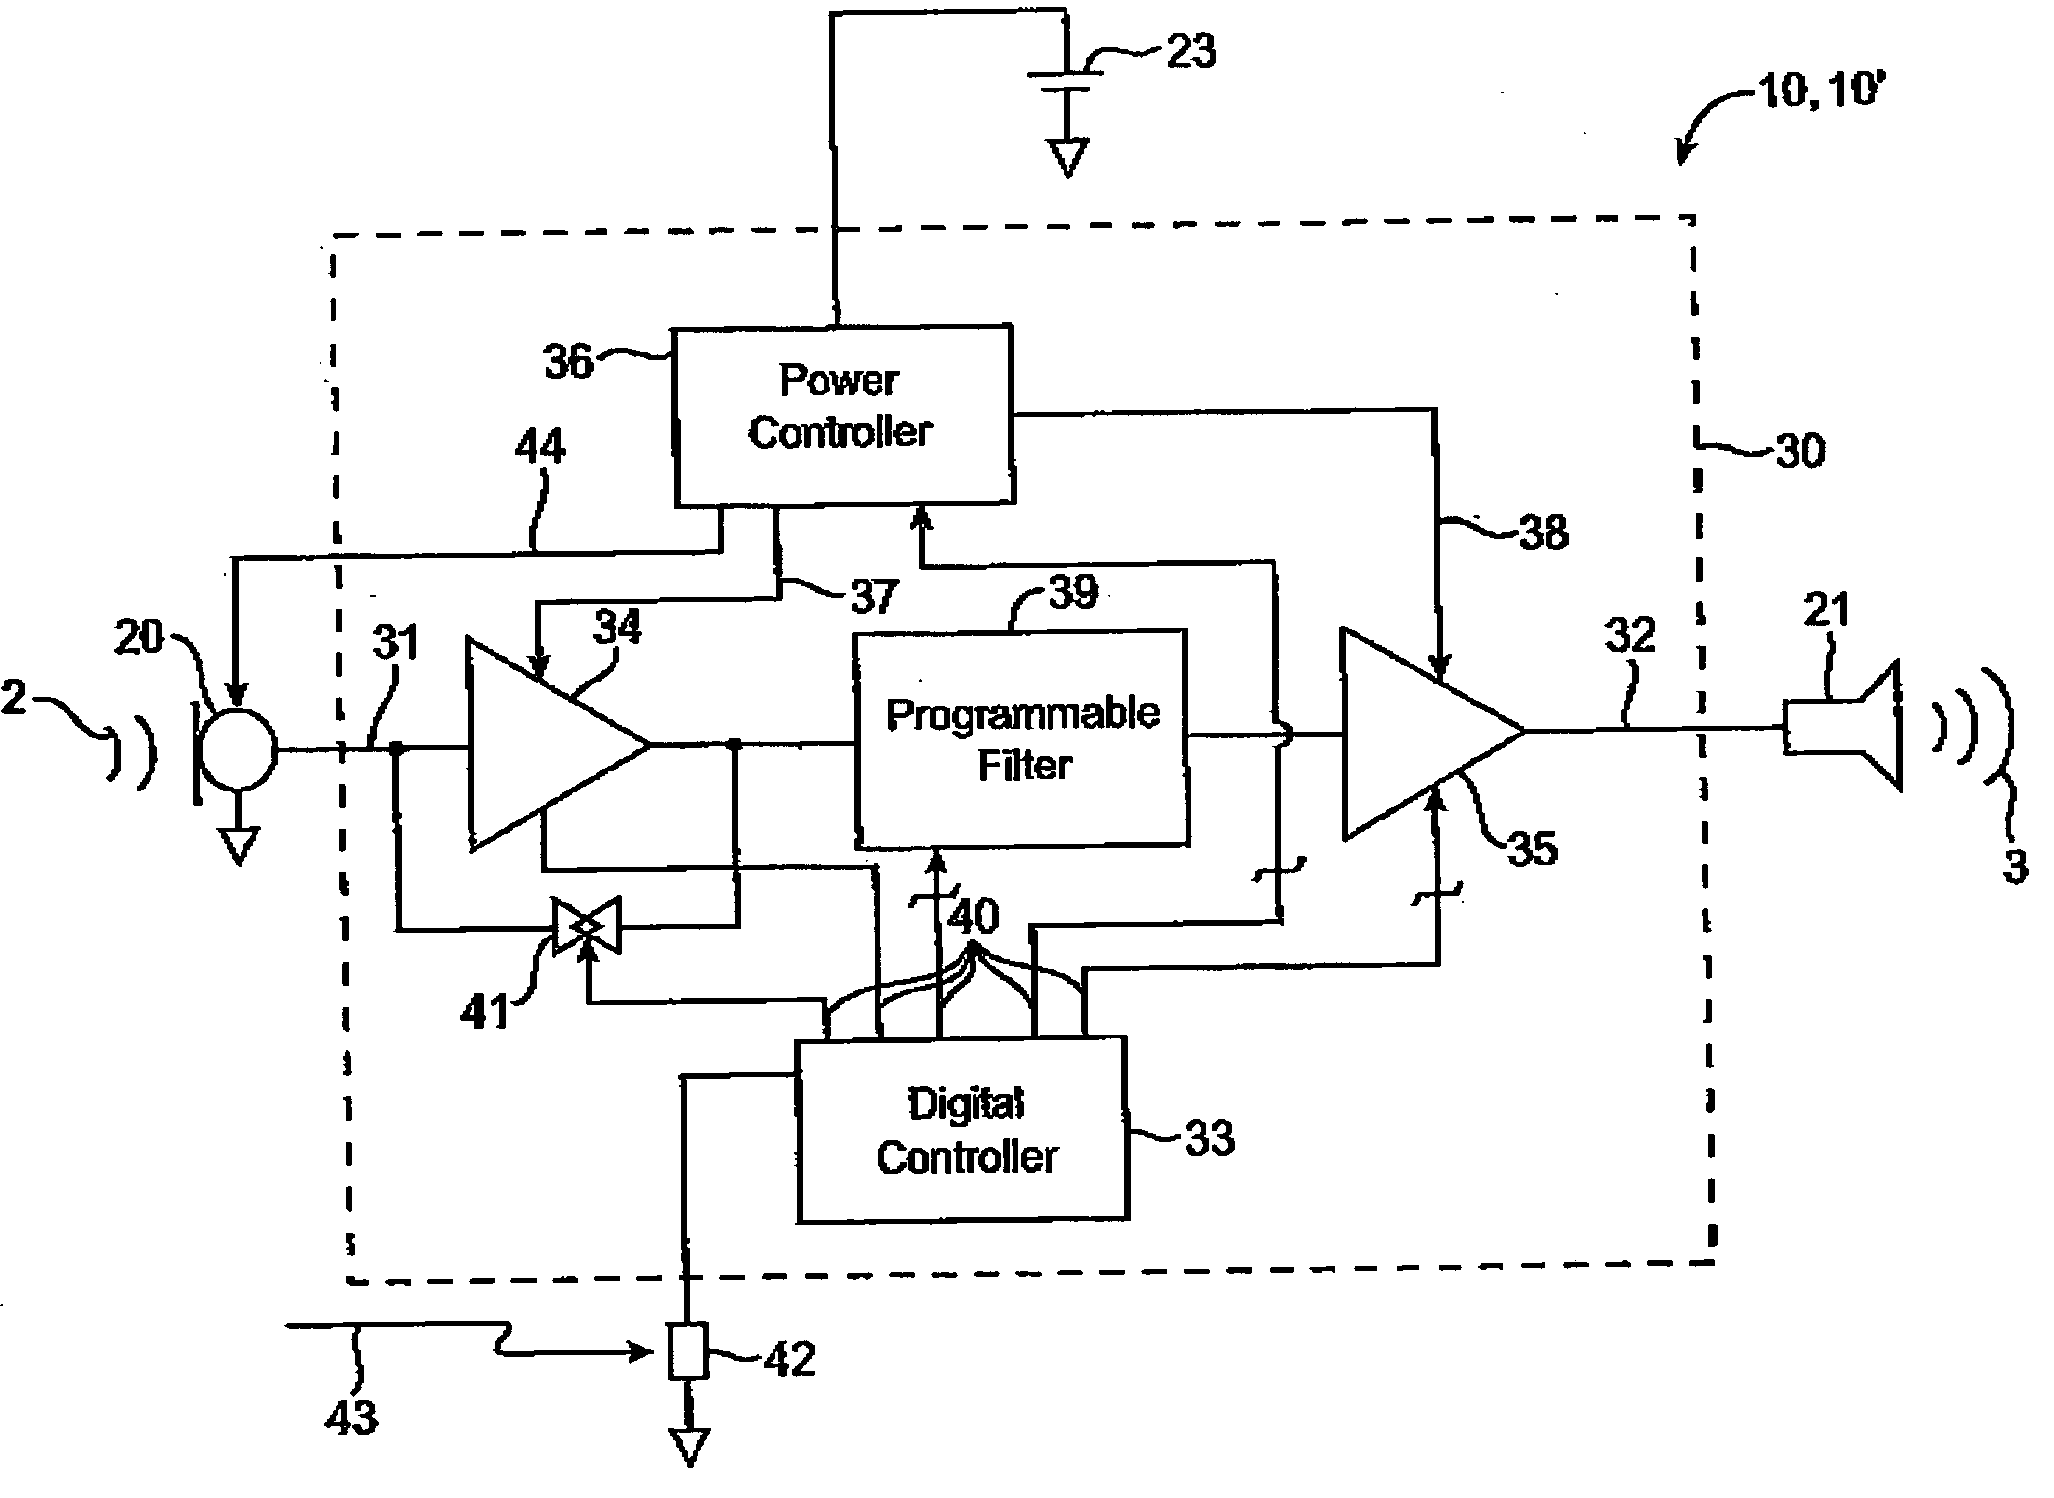 Canal hearing device with transparent mode